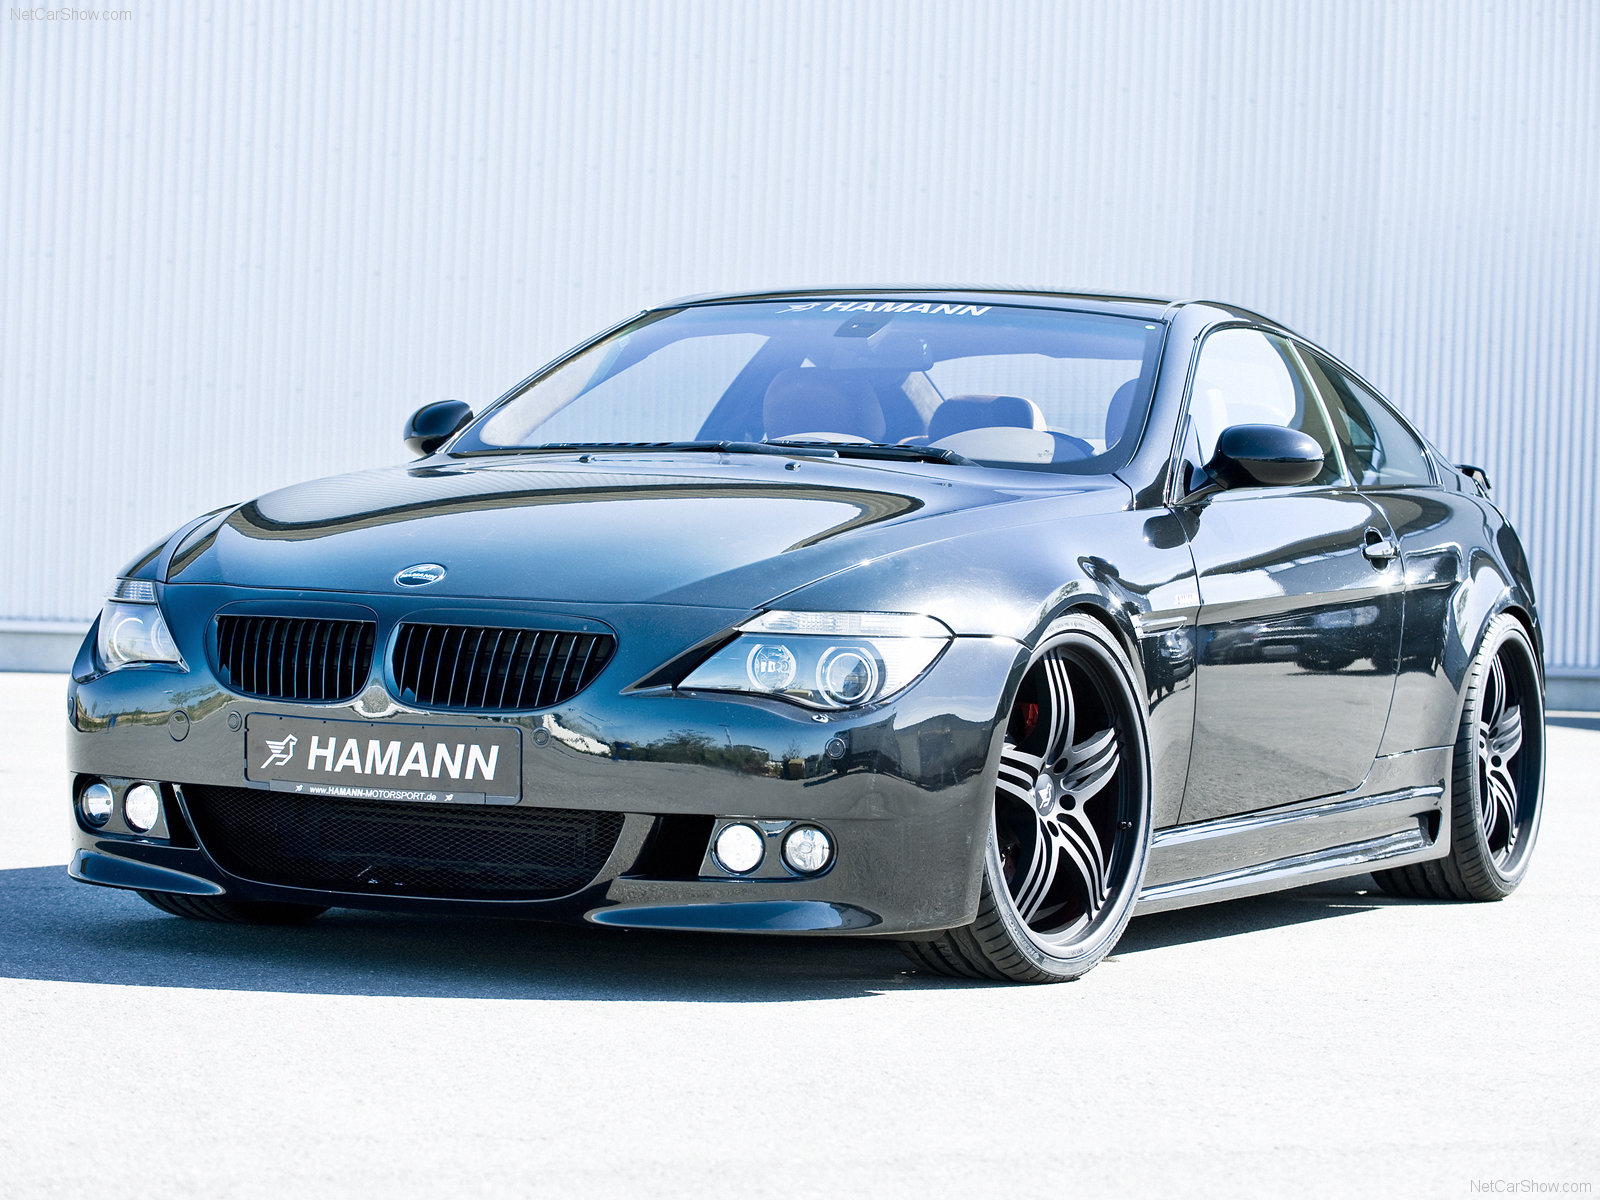 You can vote for this Hamann BMW 6 Series photo